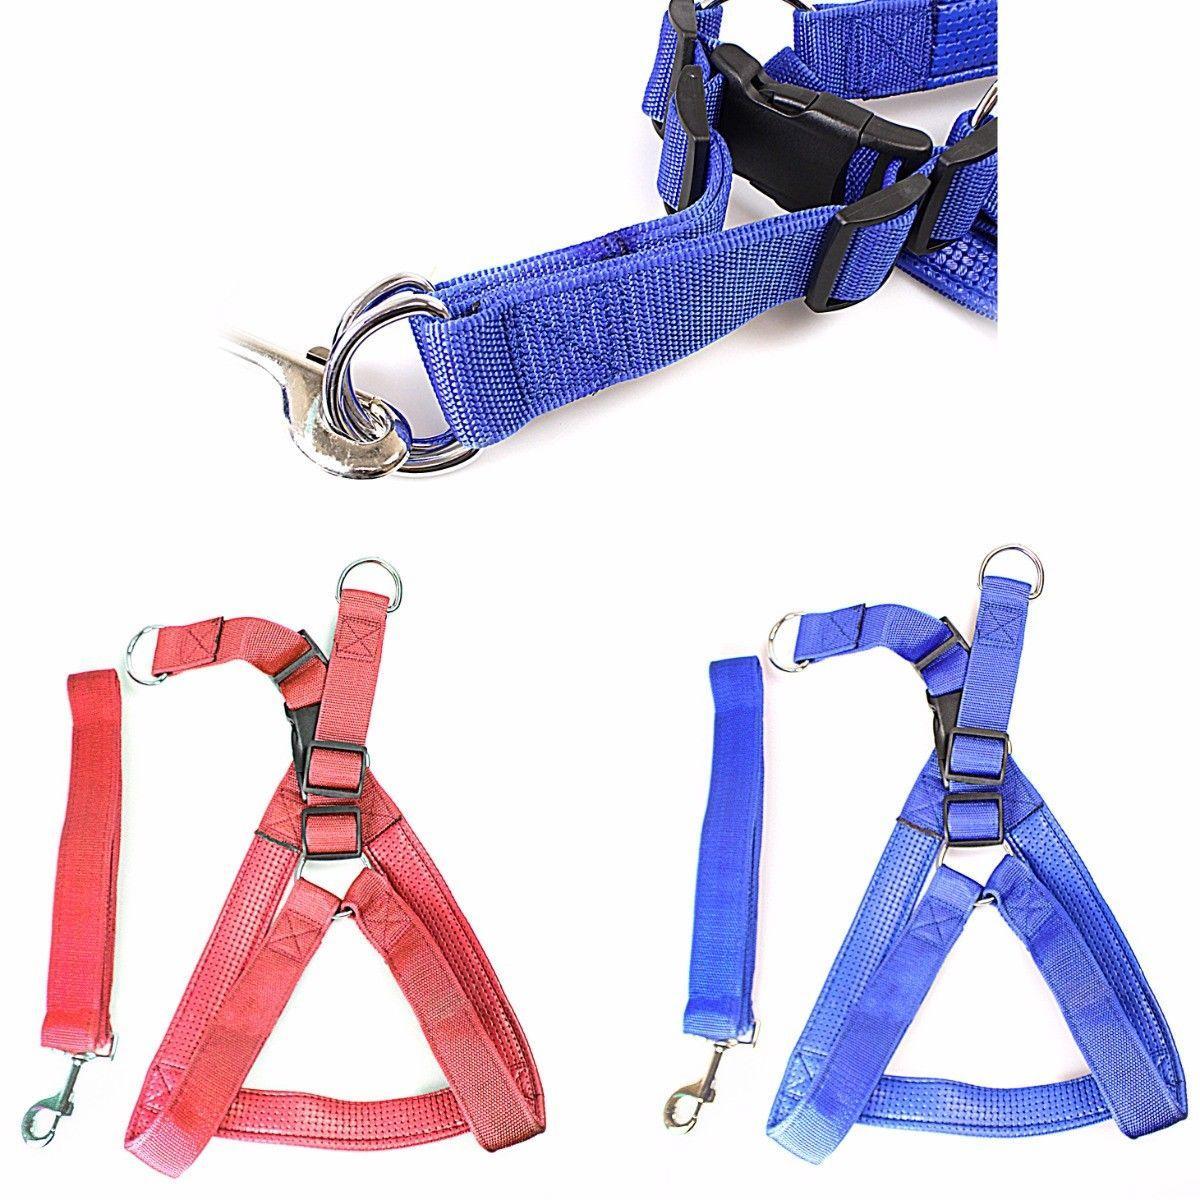 Heavy Duty Dog Harness Big Nylon Belt With Harness Attached In Blue And Red Pet 0056 A (Large Letter Rate)